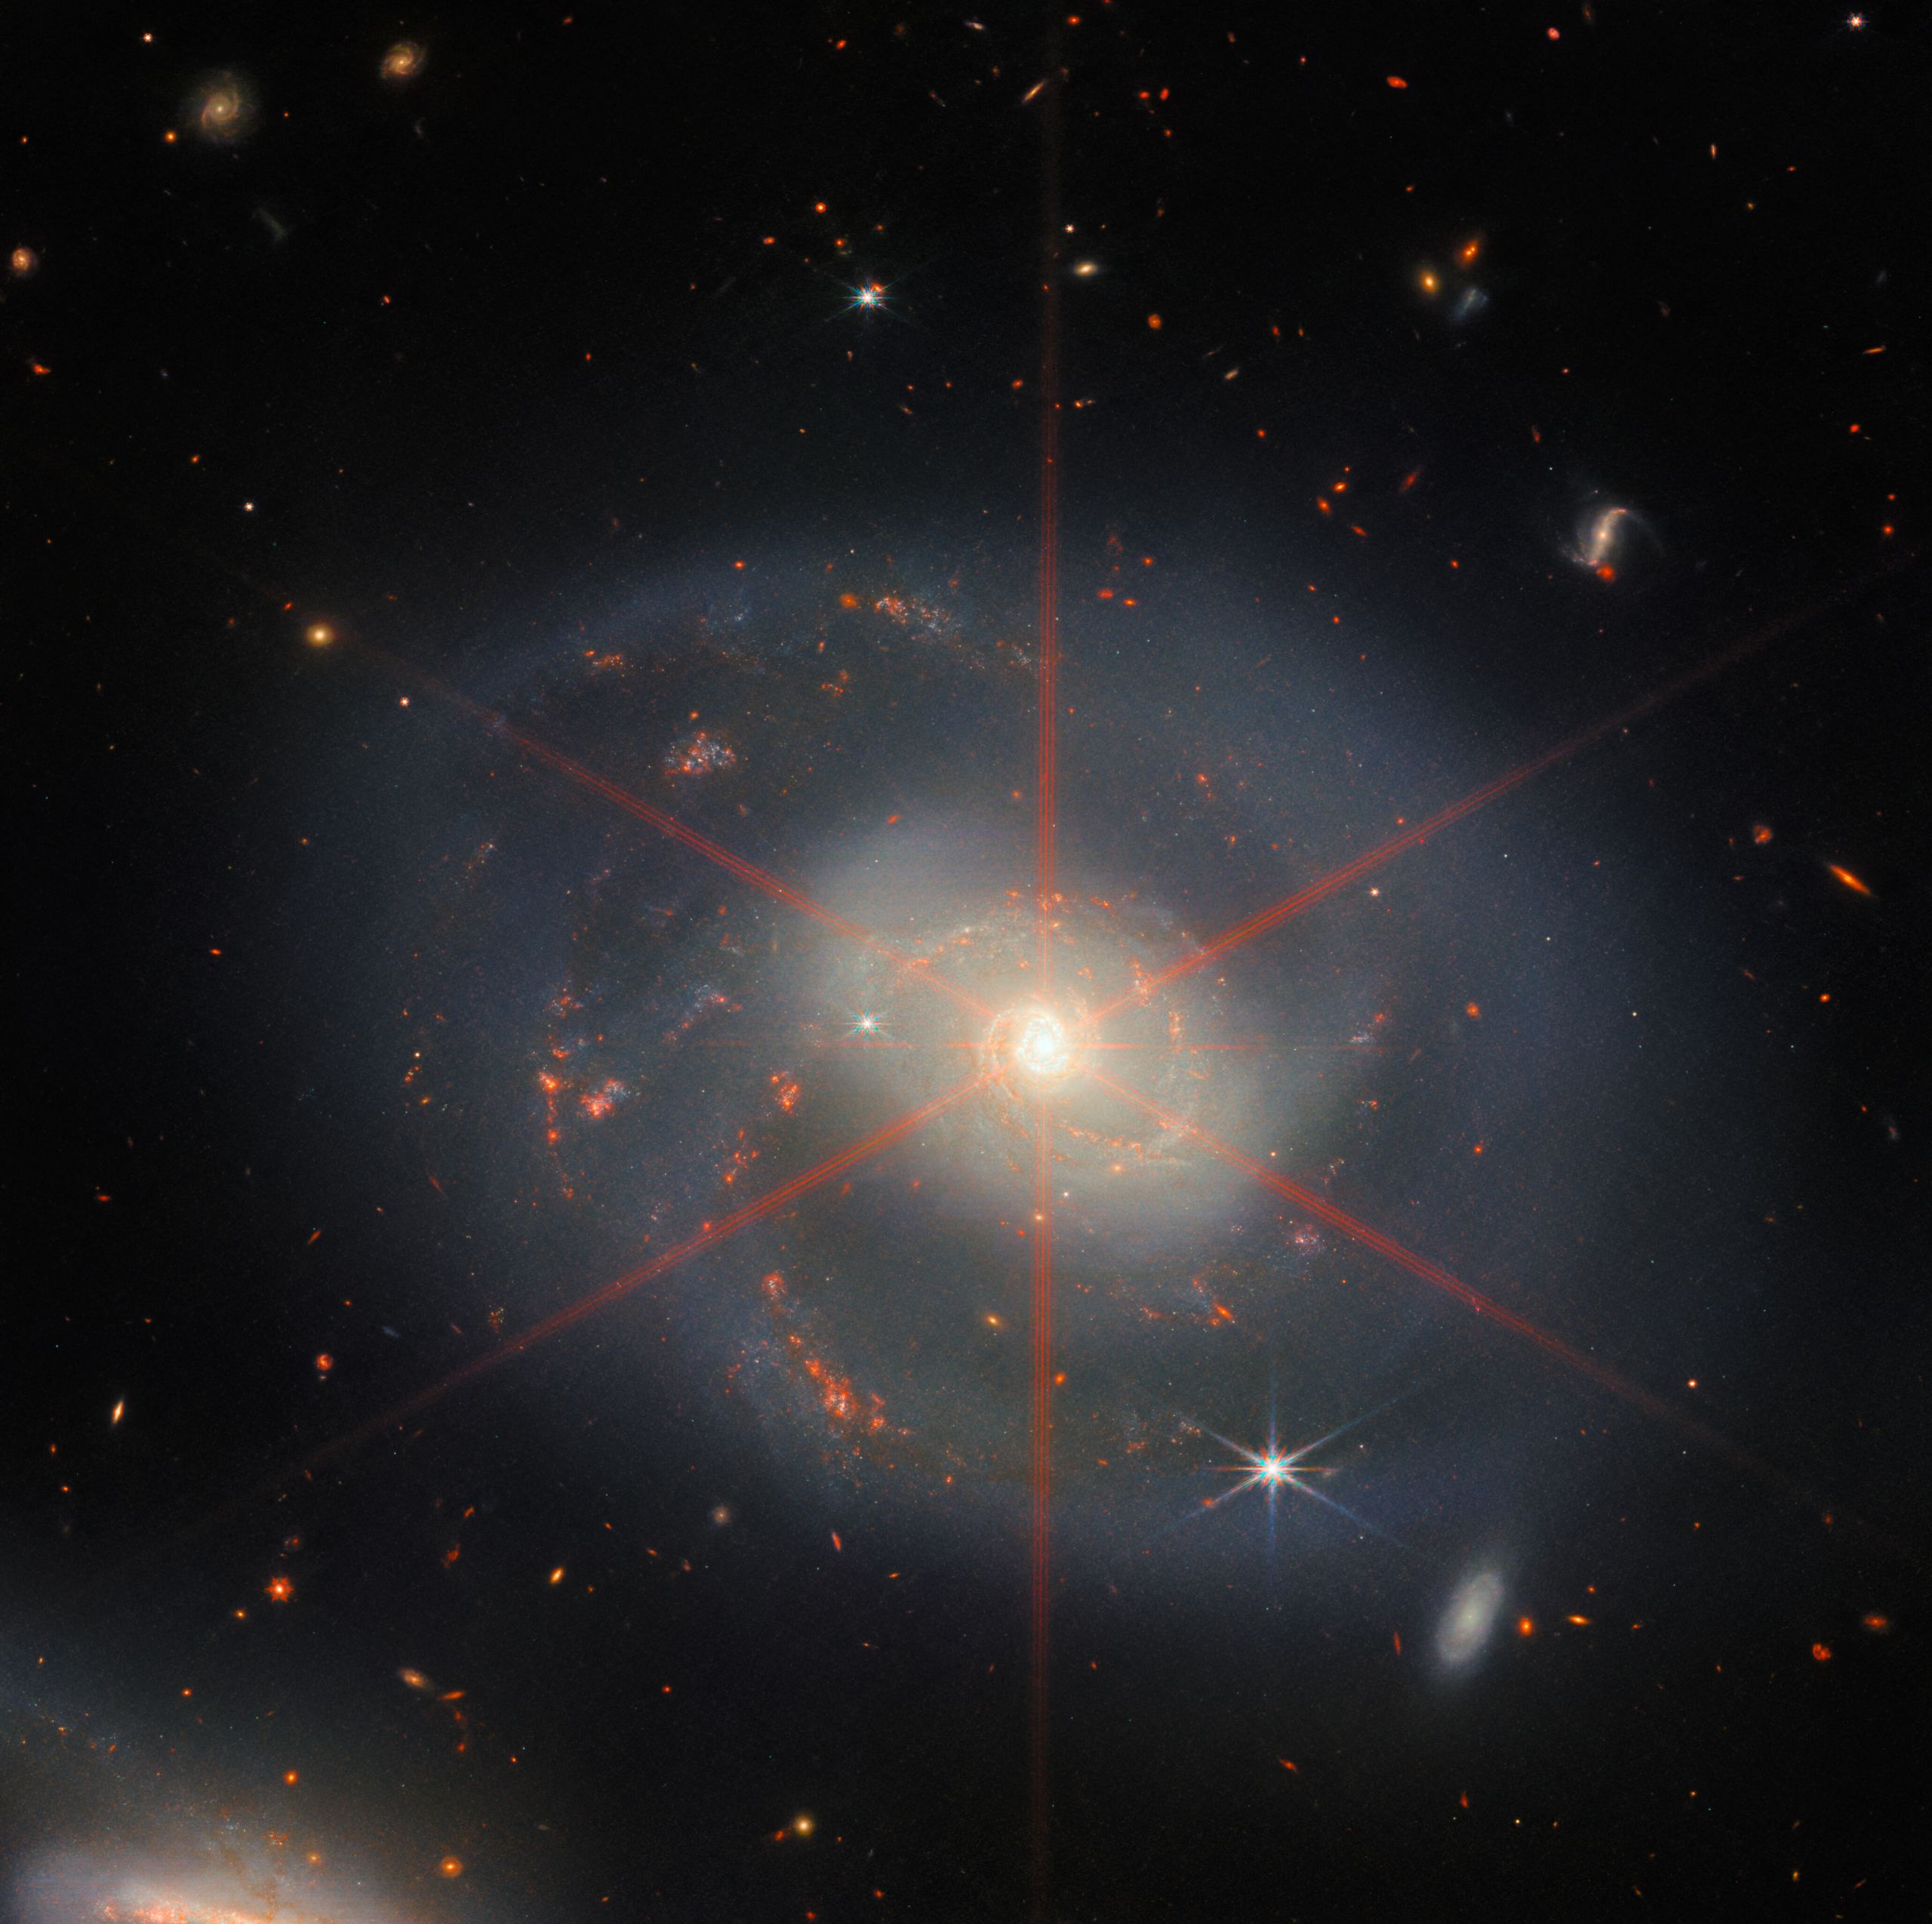 Webb’s New Image Reveals a Galaxy Awash in Star Formation